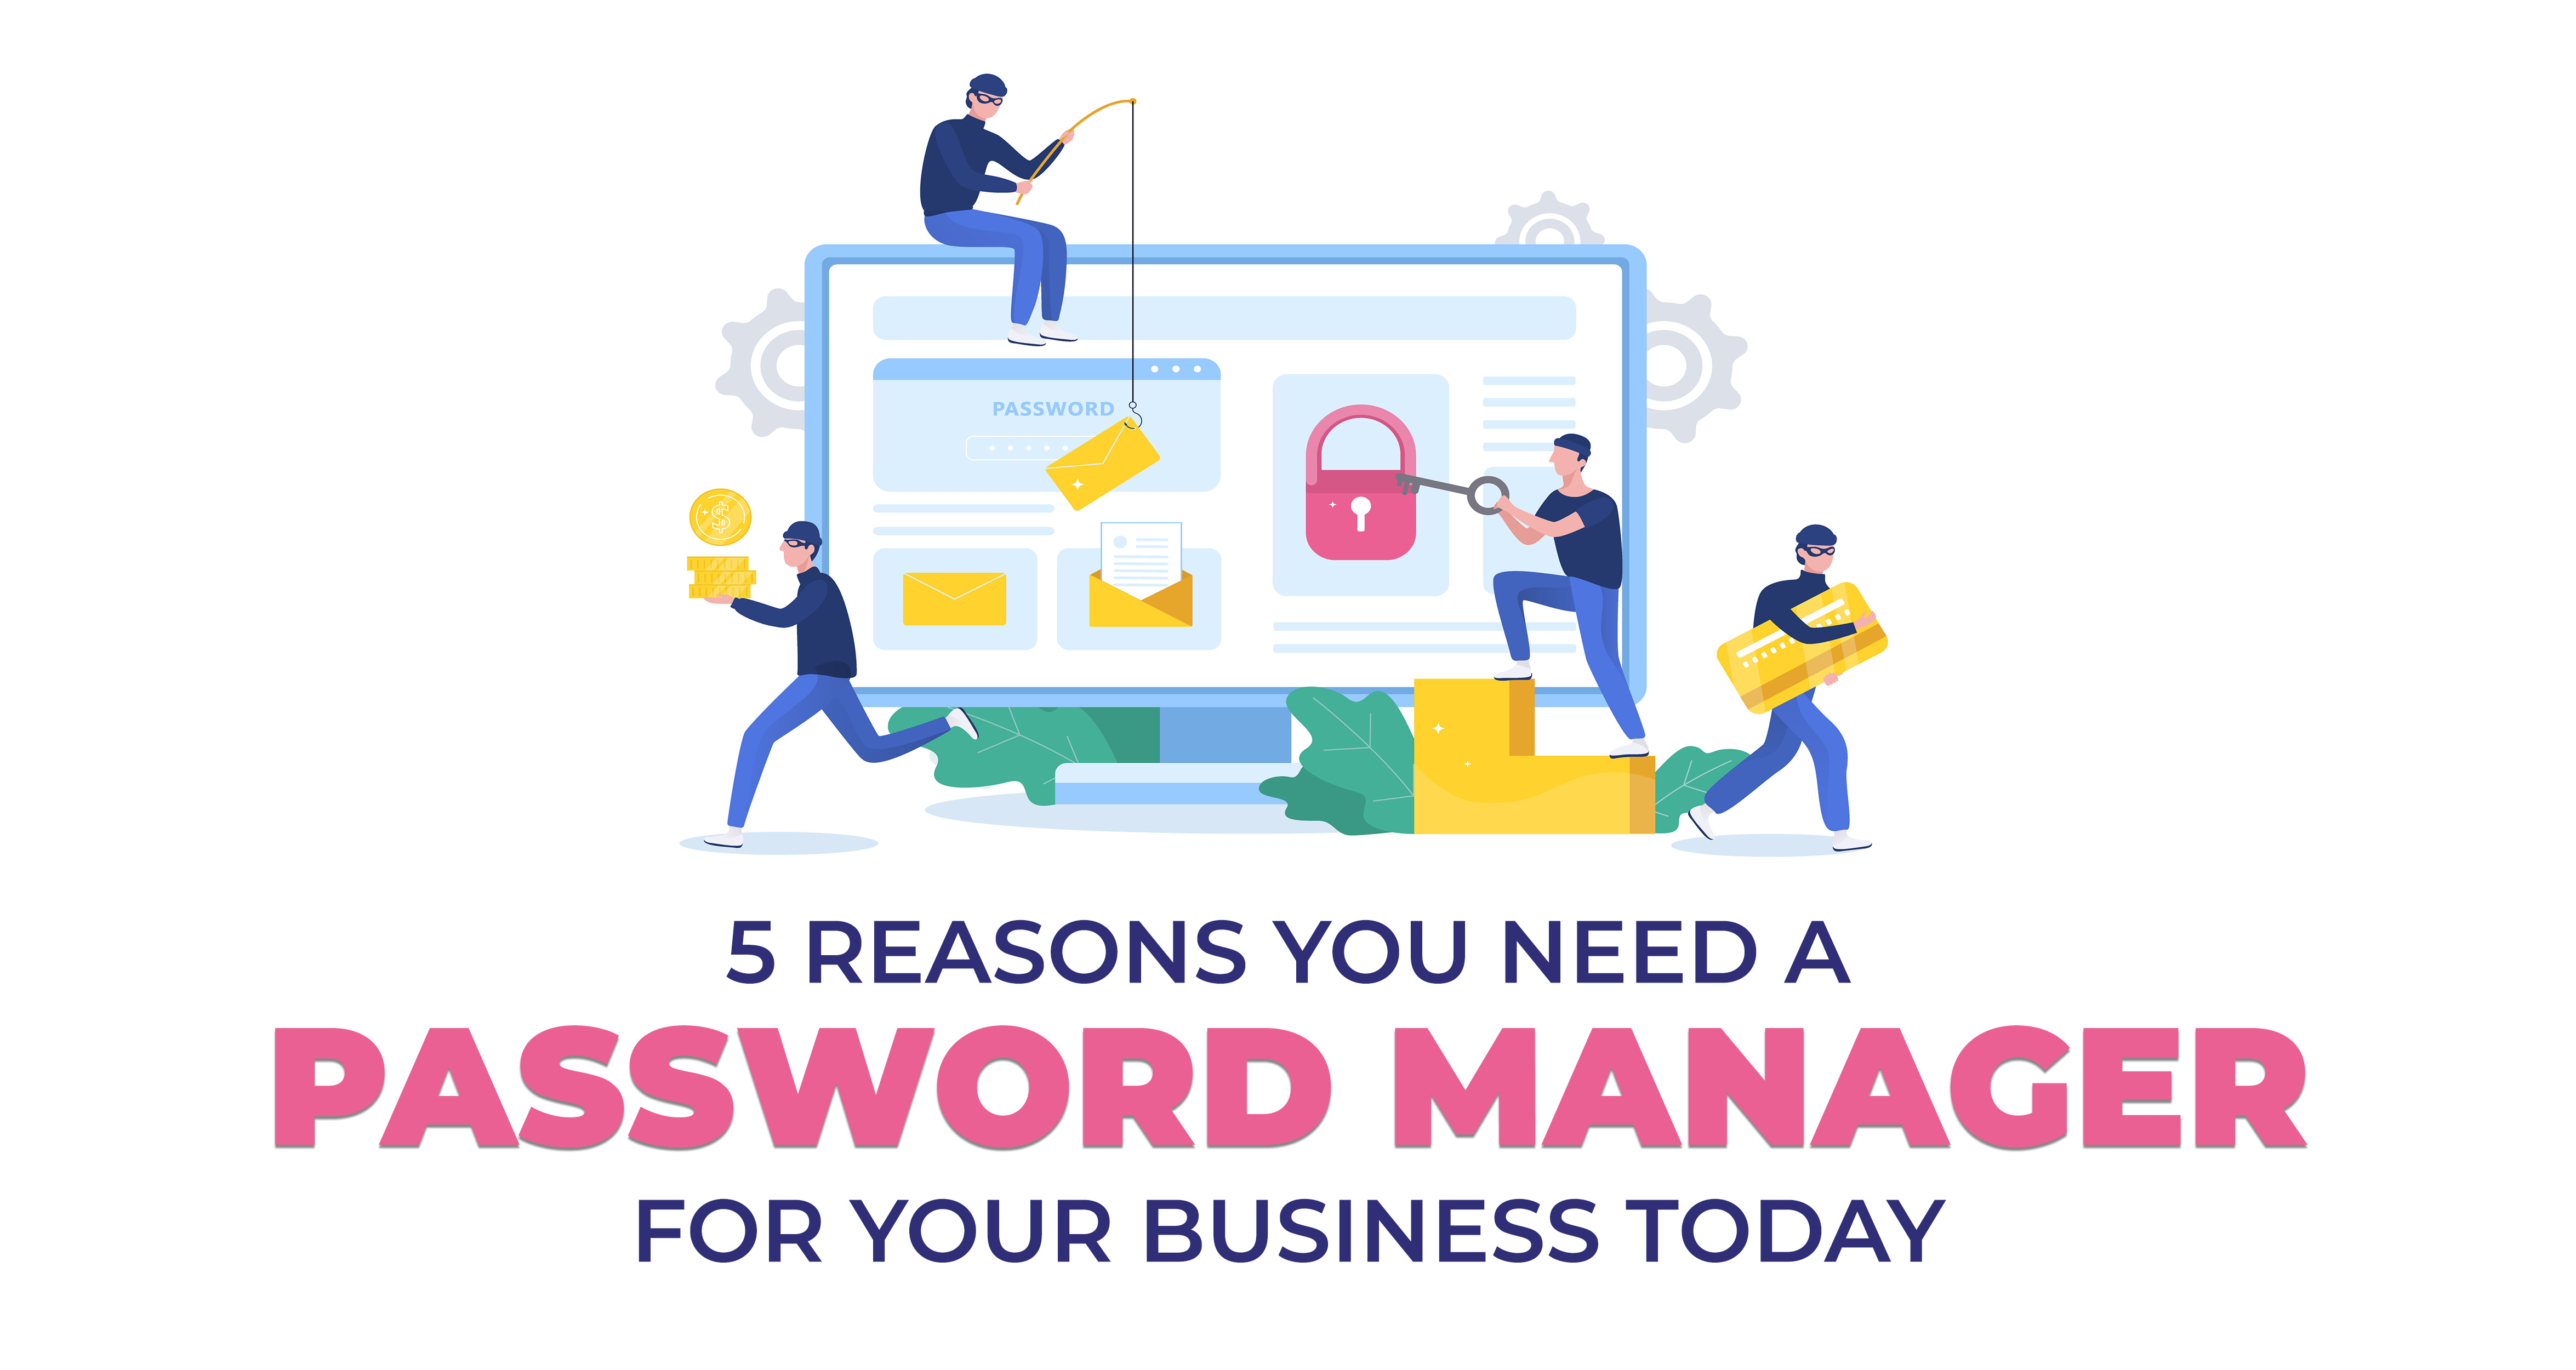 5 Reasons You Need a Password Manager for Your Business Today